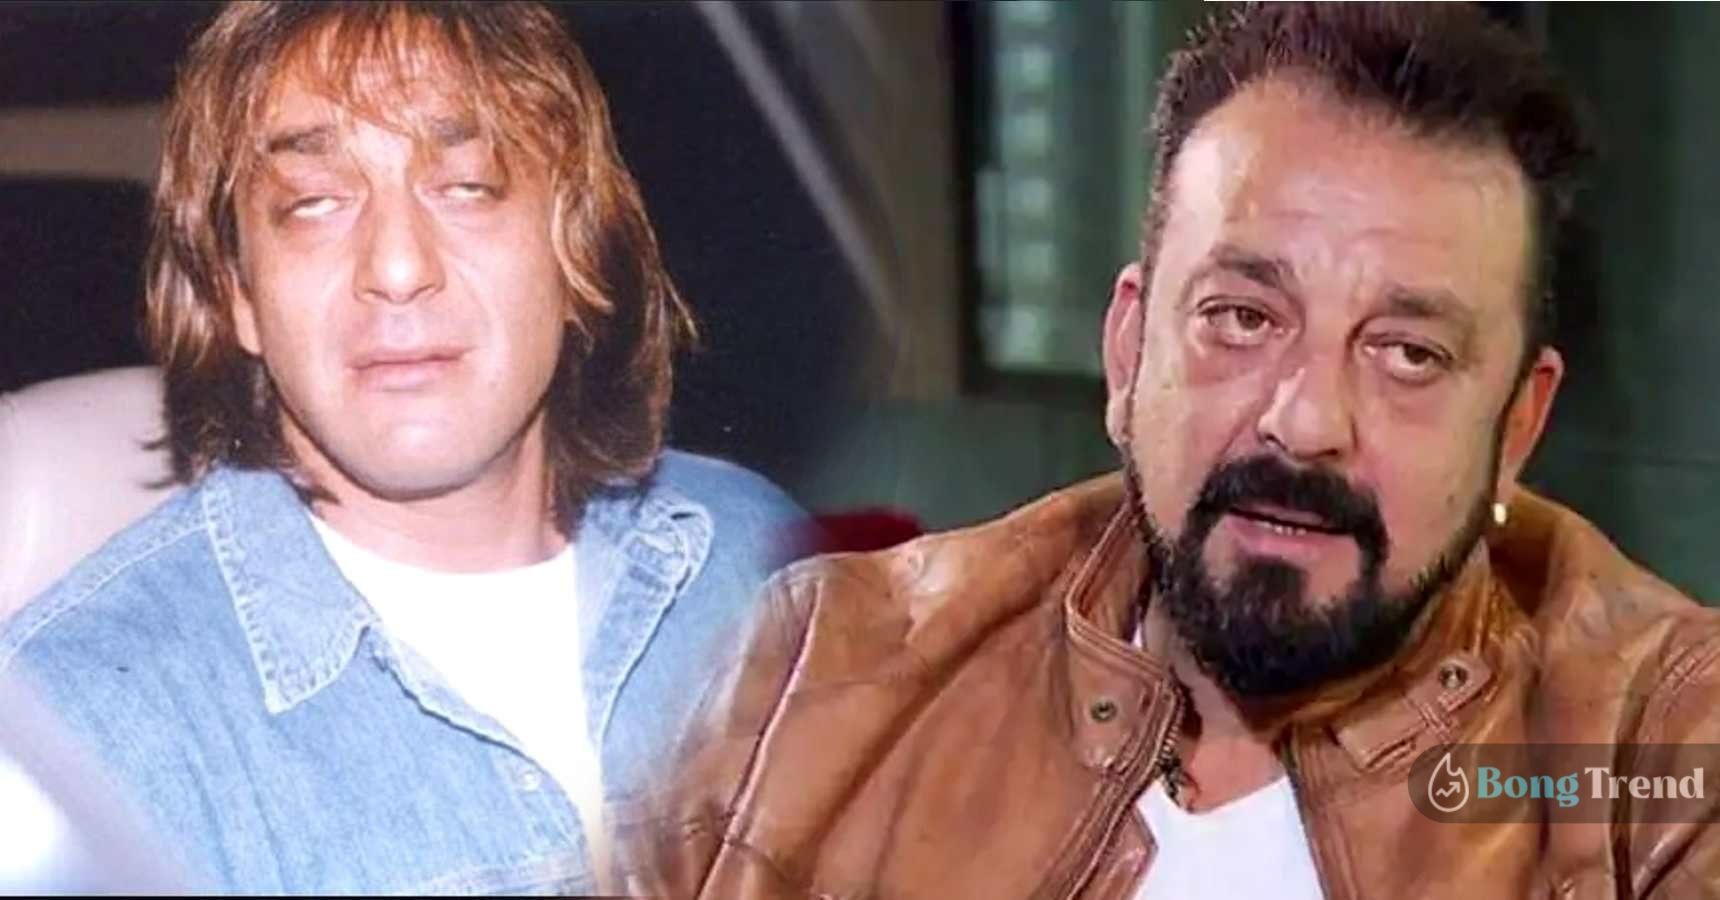 After taking heavy drugs Sanjay Dutt slept for 2 days said house servant